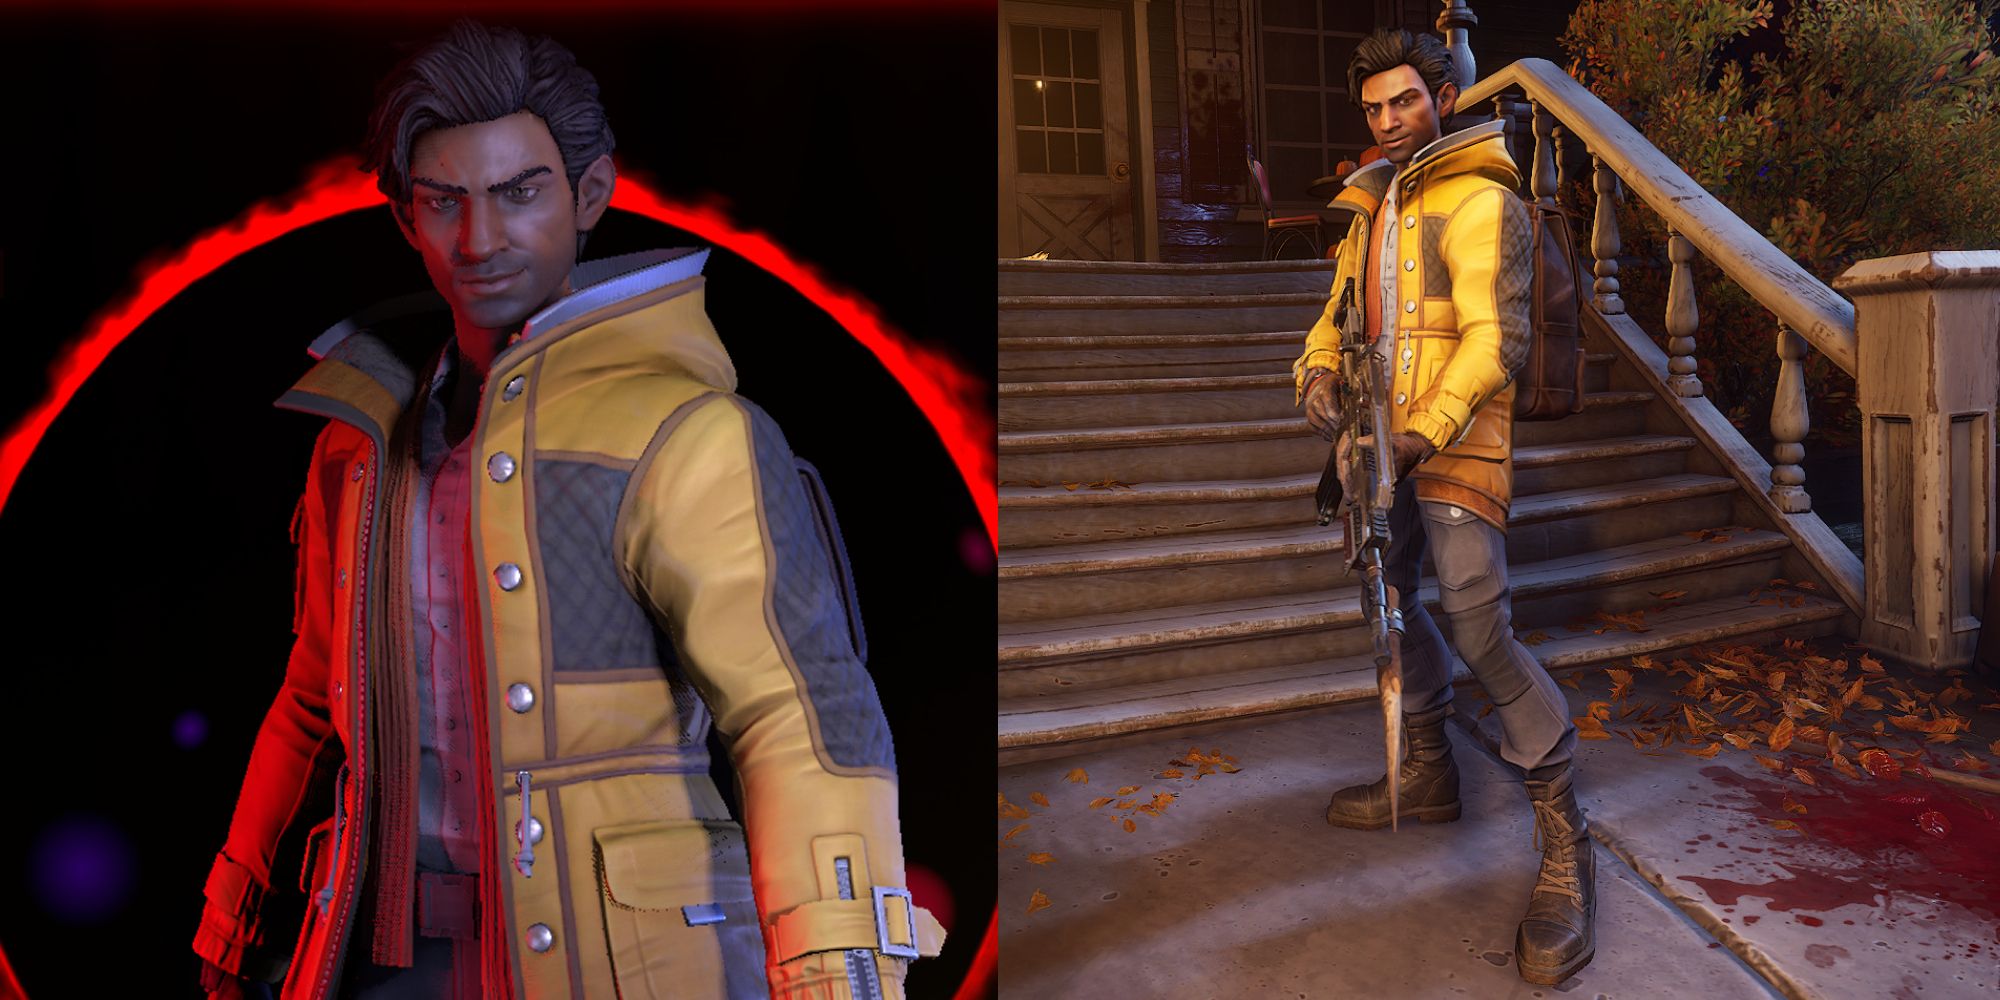 A Split Image Containing Screenshots Of Devinder From Redfall